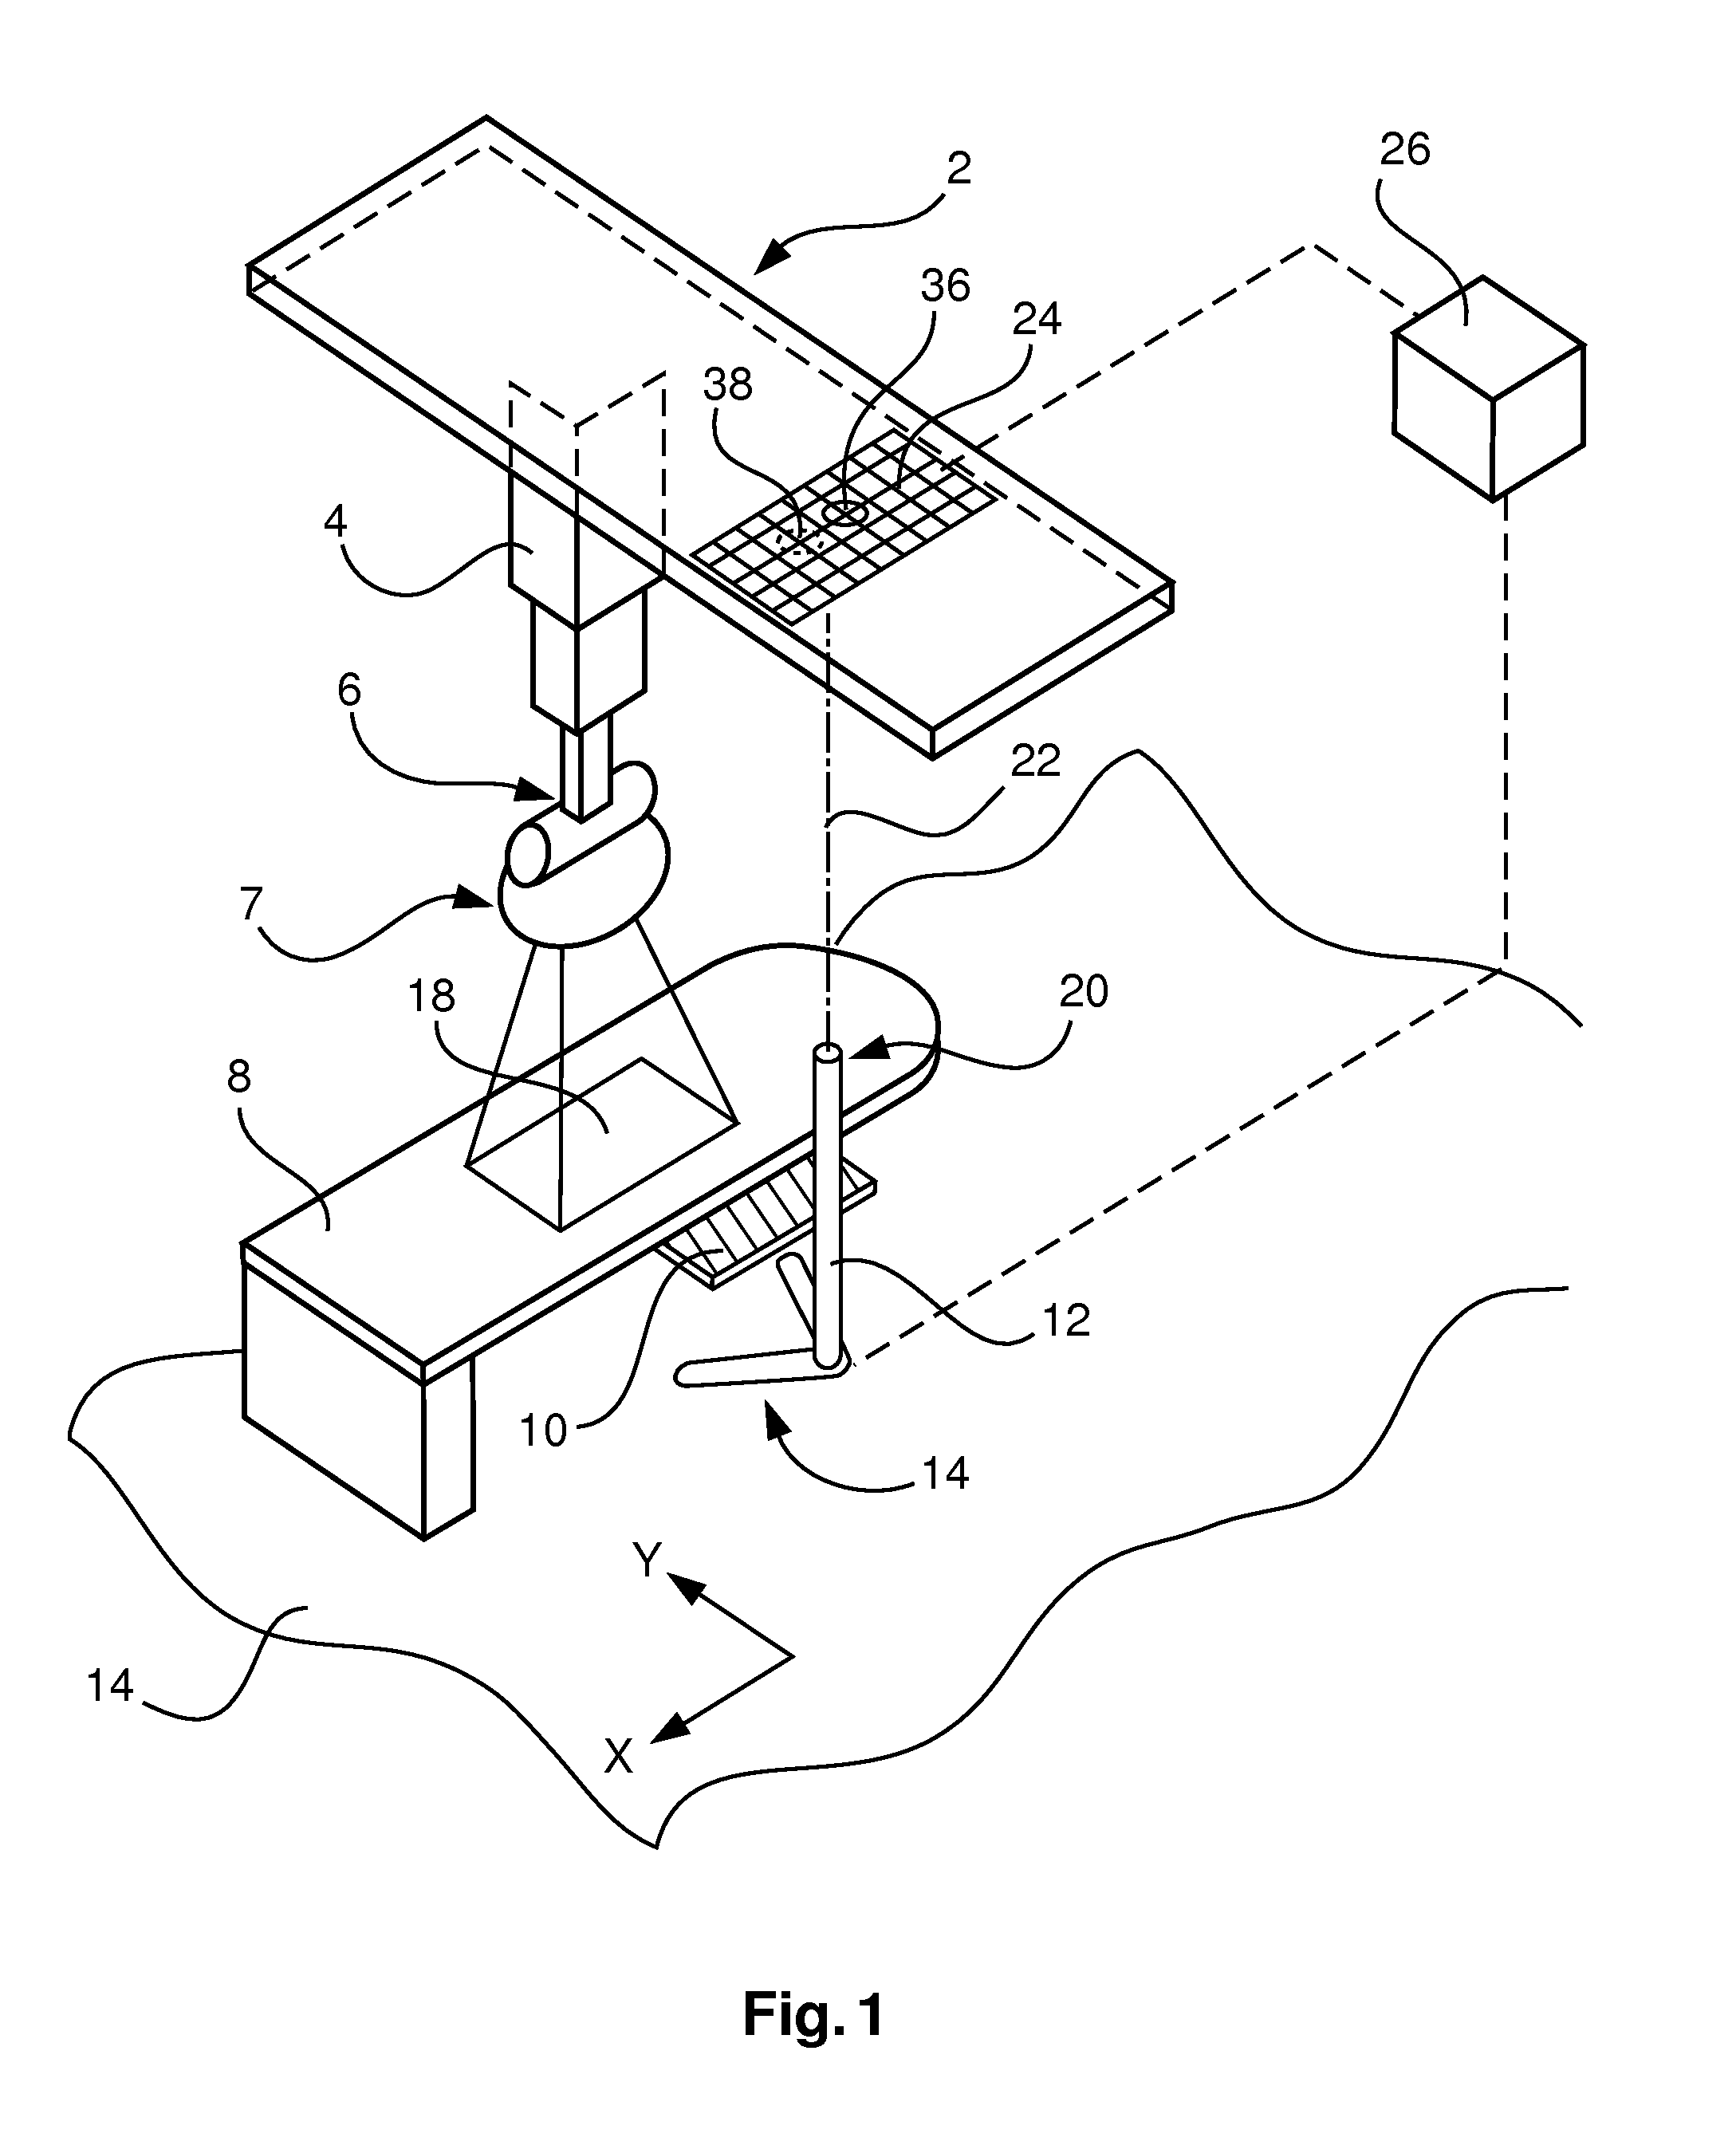 Medical imaging system and method for providing an x-ray image